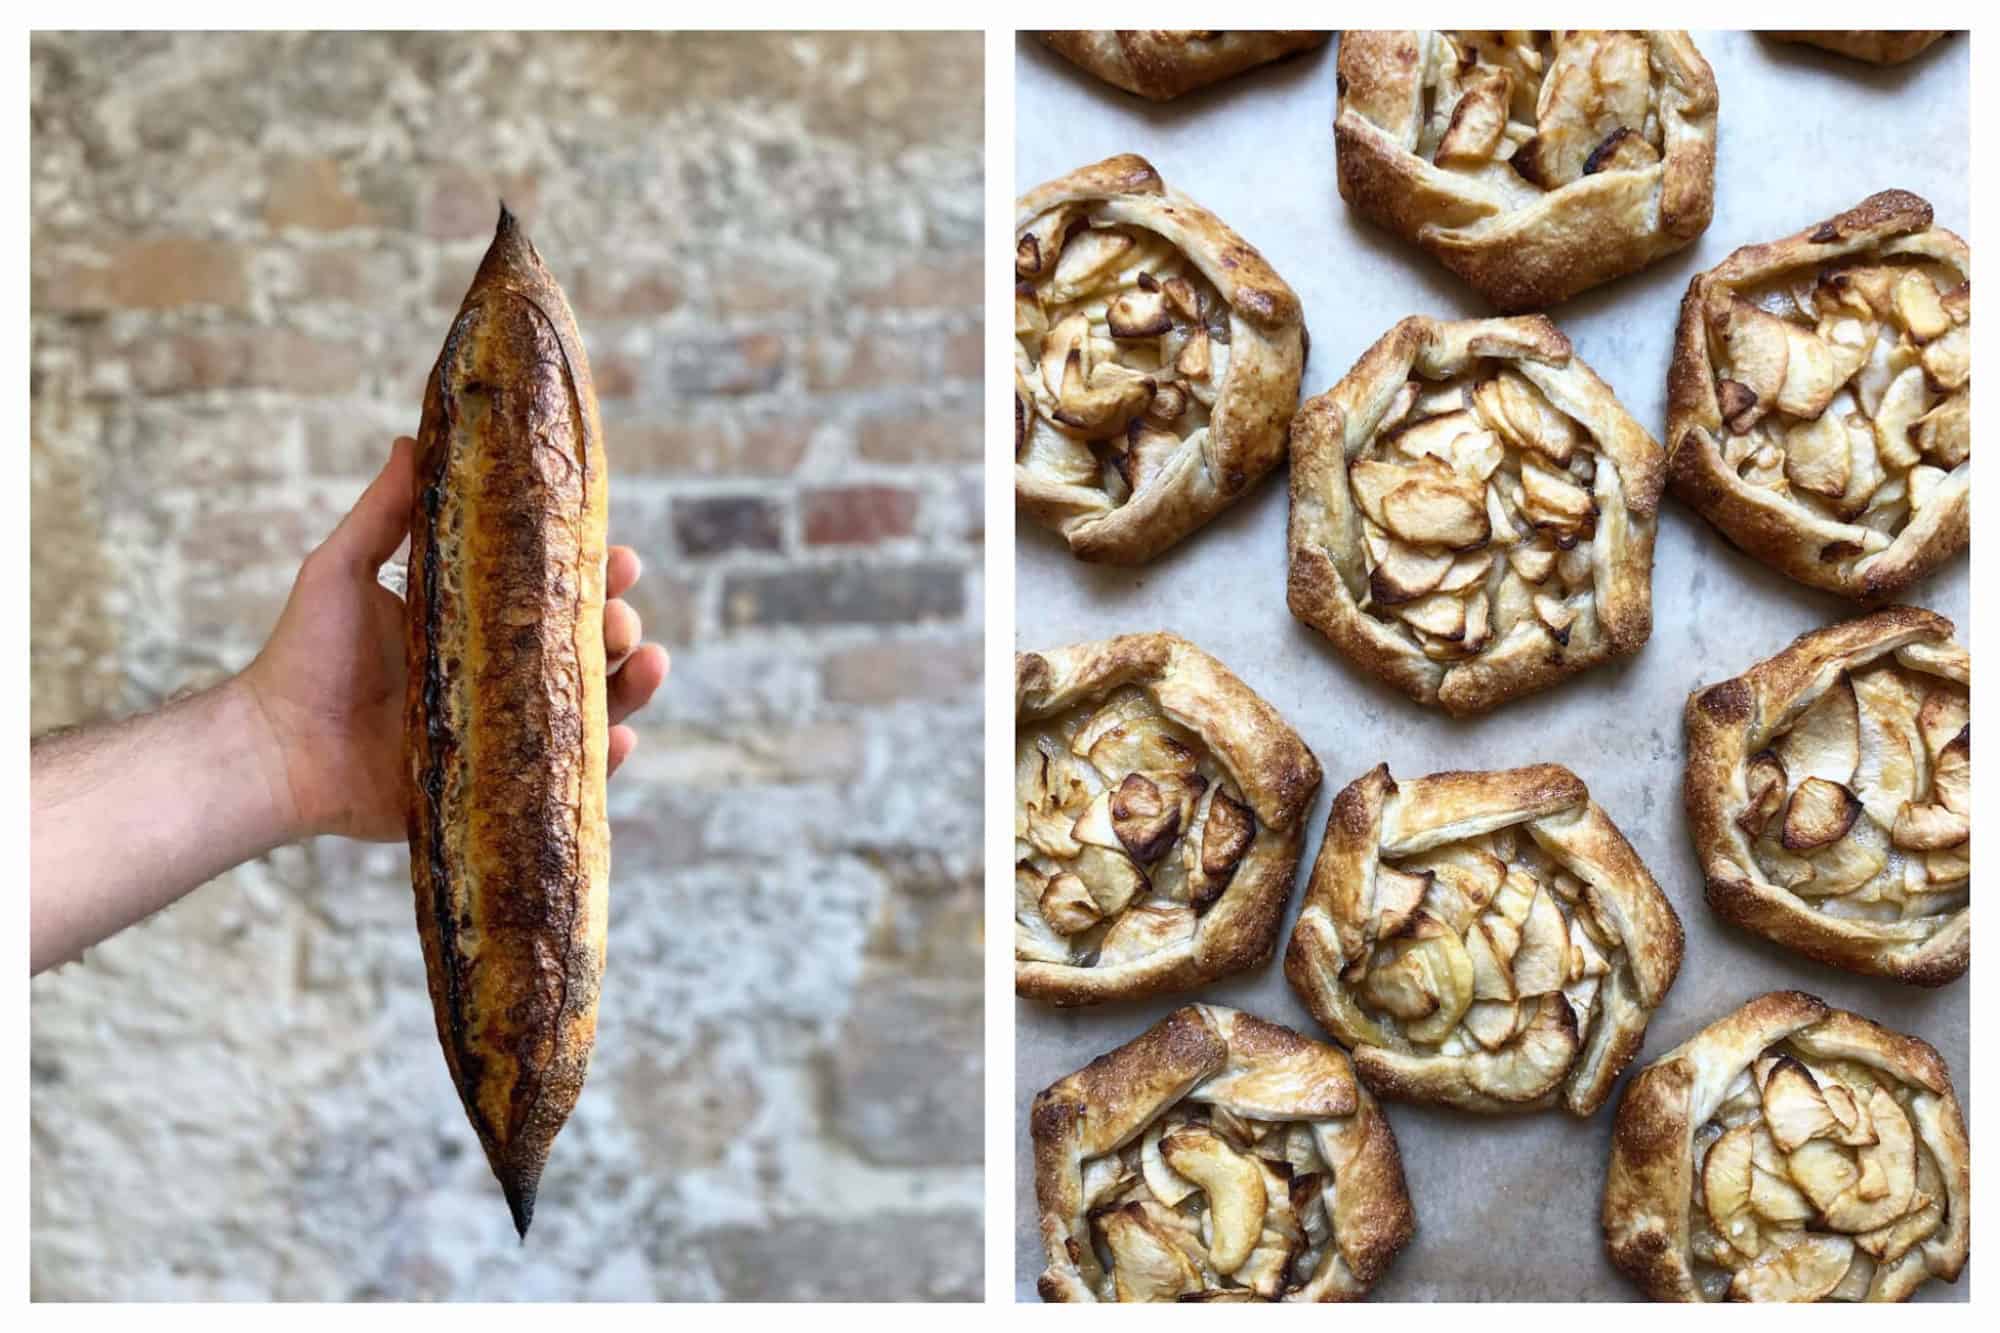 Left: someone holding a French baguette in front of a brick wall. Only the person's hand and the bread is visible. Right: an aerial view of a tray of several apple tarts. They are small and open faced so that the cut apples are visible.